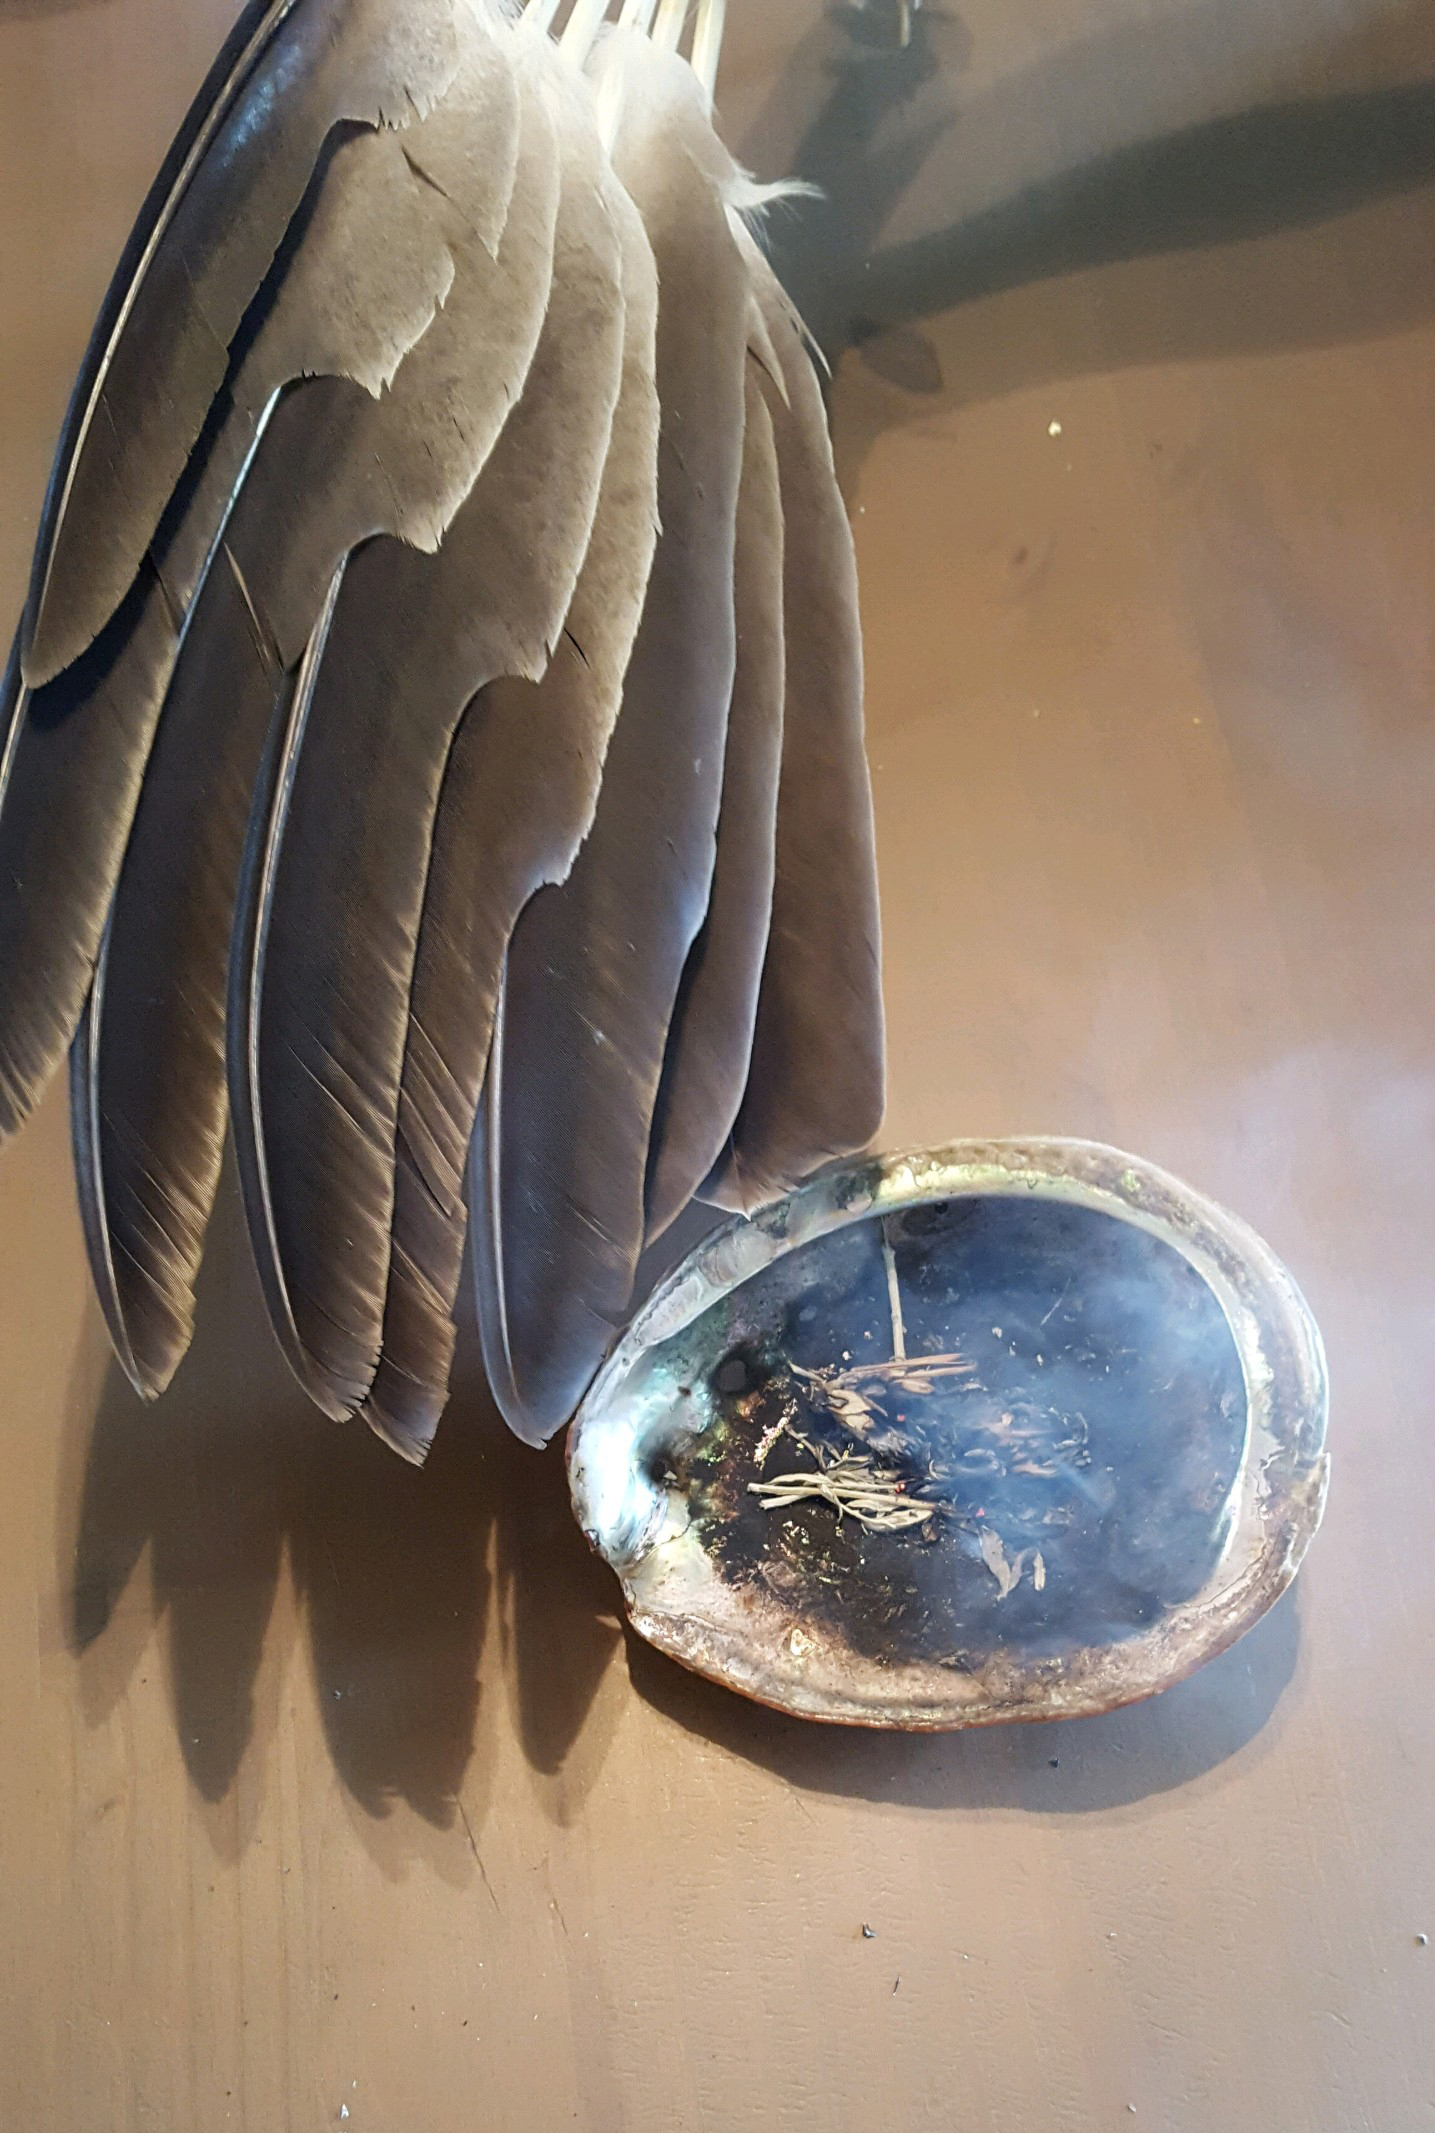 Eagle wing fan with burning sage in a shell.